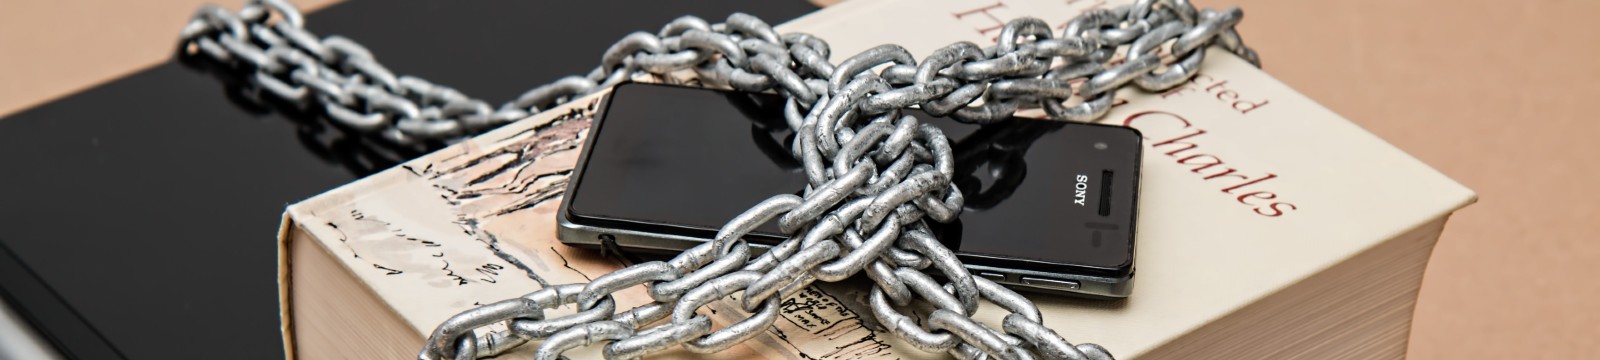 chain covering a mobile device and a book